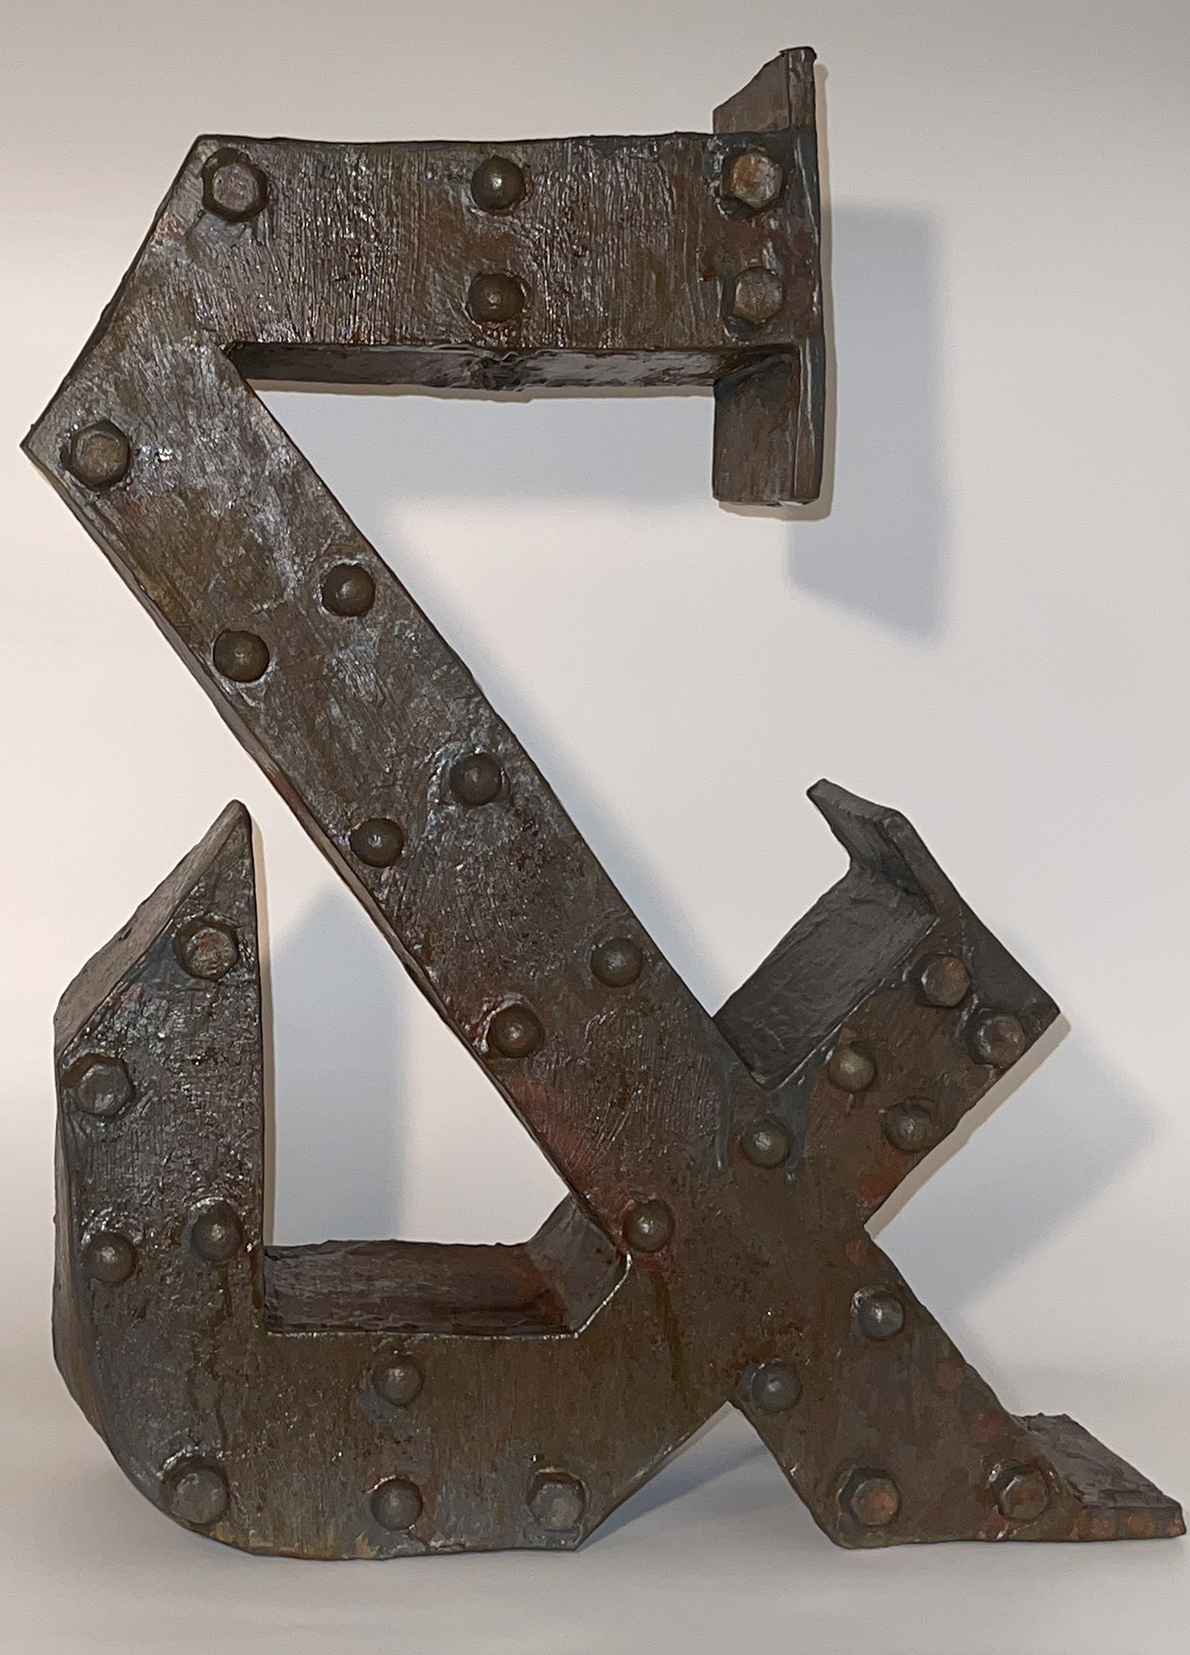 Cecilia Torres Ampersand 21 is a very angular version of that character fashioned in low fire paper clay, metal coating and patina.